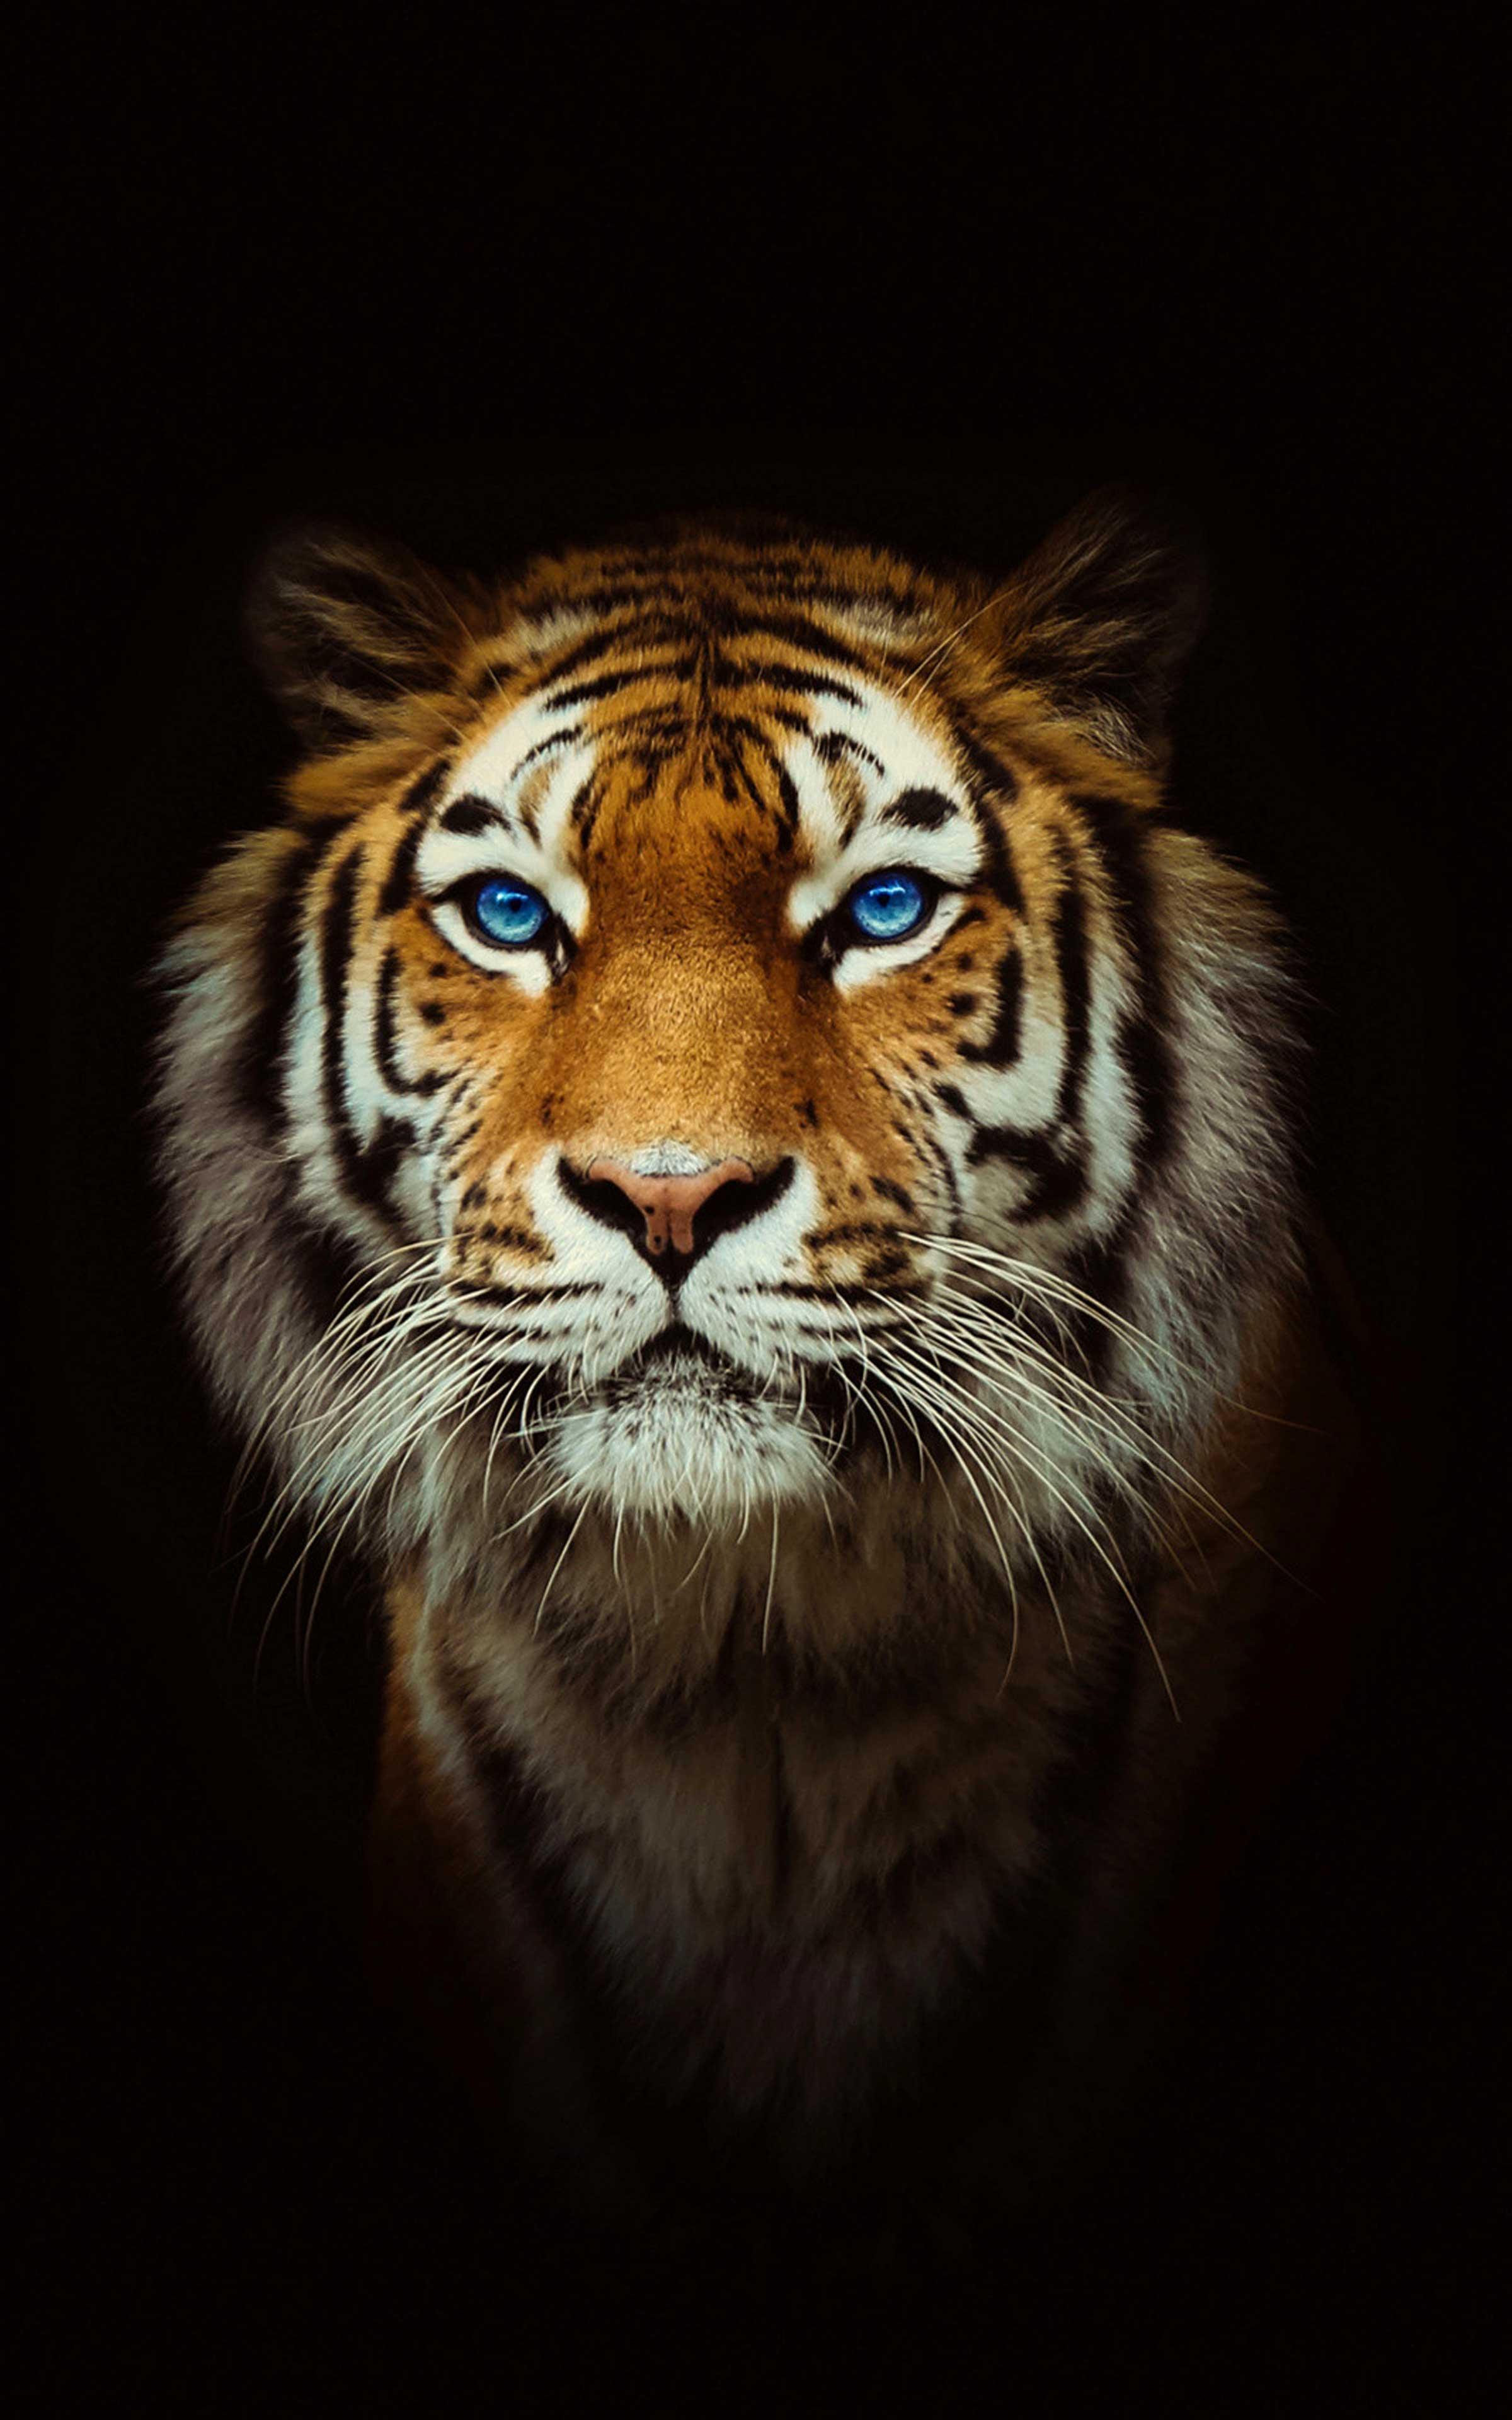 Awesome Tiger Wallpaper Free Awesome Tiger